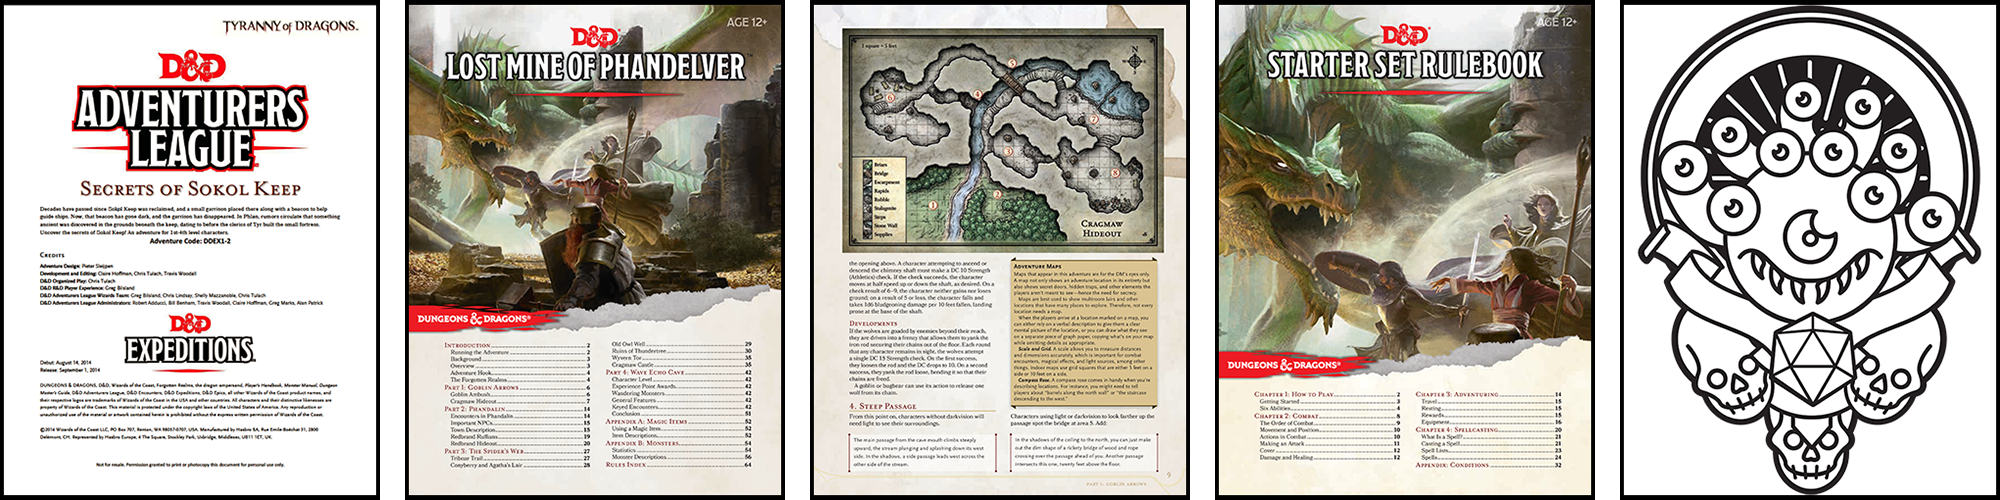 Images of free D&D material.